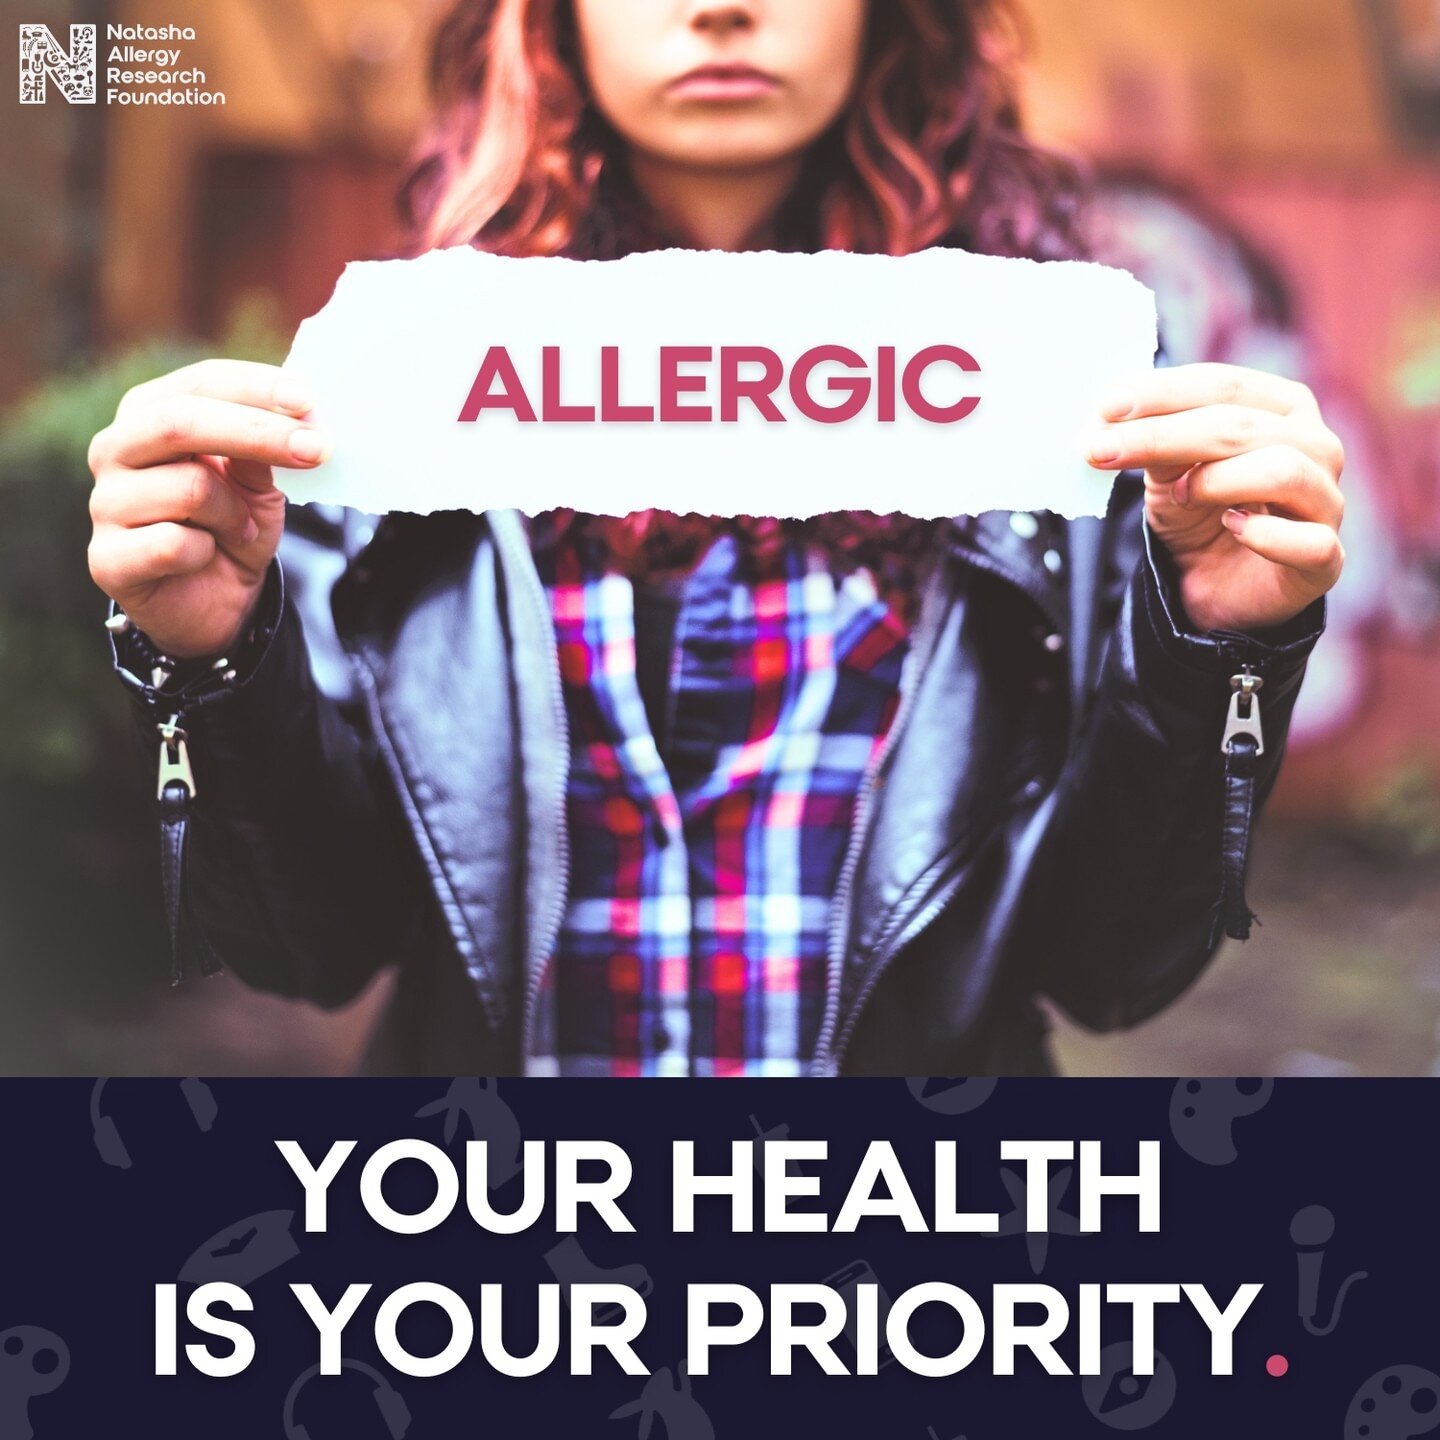 Have you ever felt like you need to justify your allergies? Or do you worry that you may not be believed, taken seriously, or worse that they are completely dismissed?

When it comes to your allergies, your health should always be your highest priori